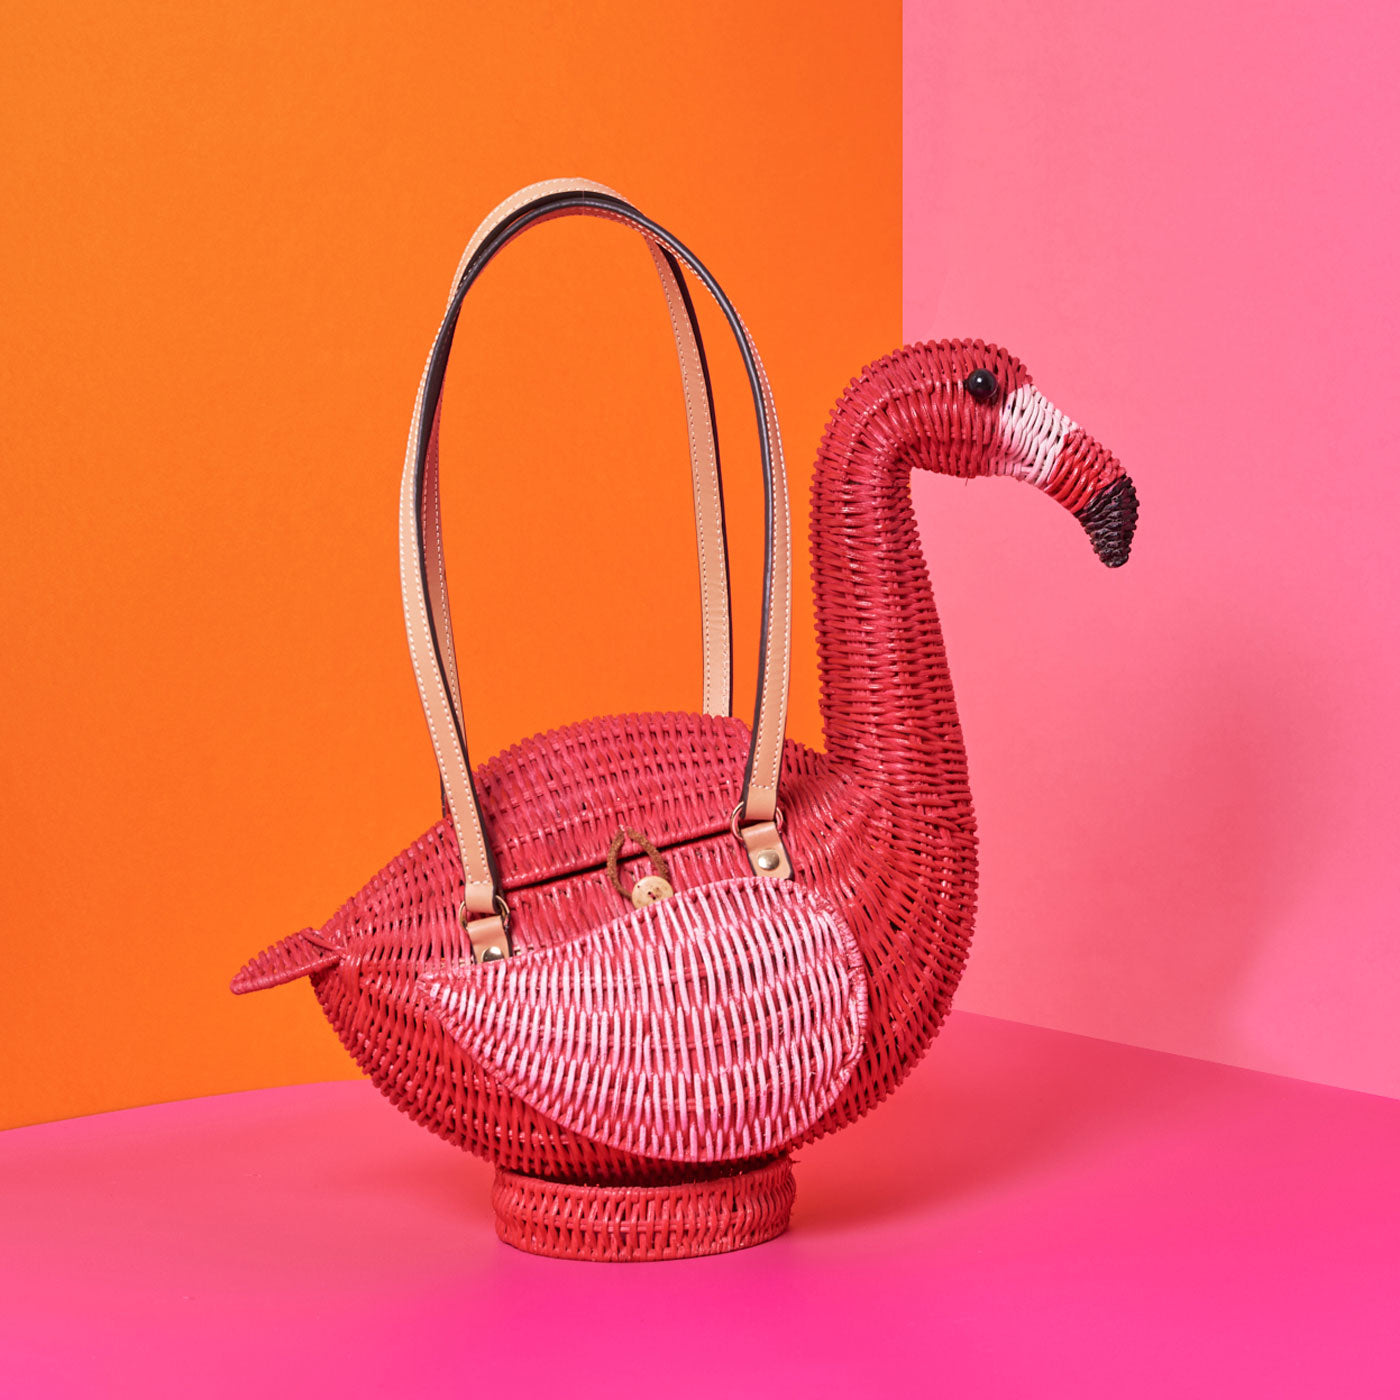 Wicker Darling's Flamingo Montoya the flamingo purse on a colourful background